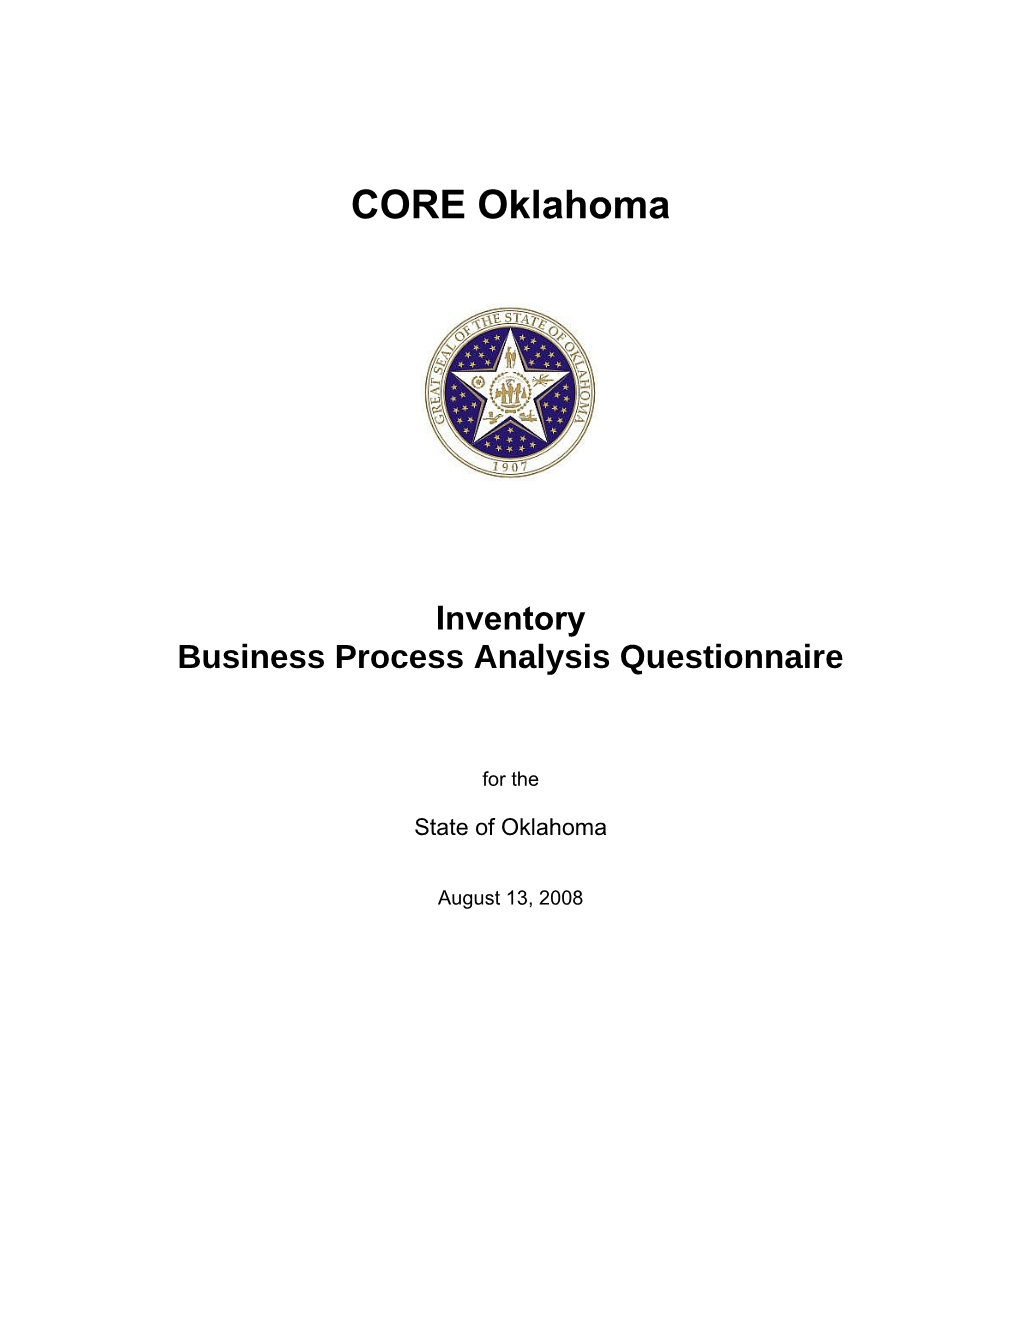 Inventory Business Process Analysis Questionnaire